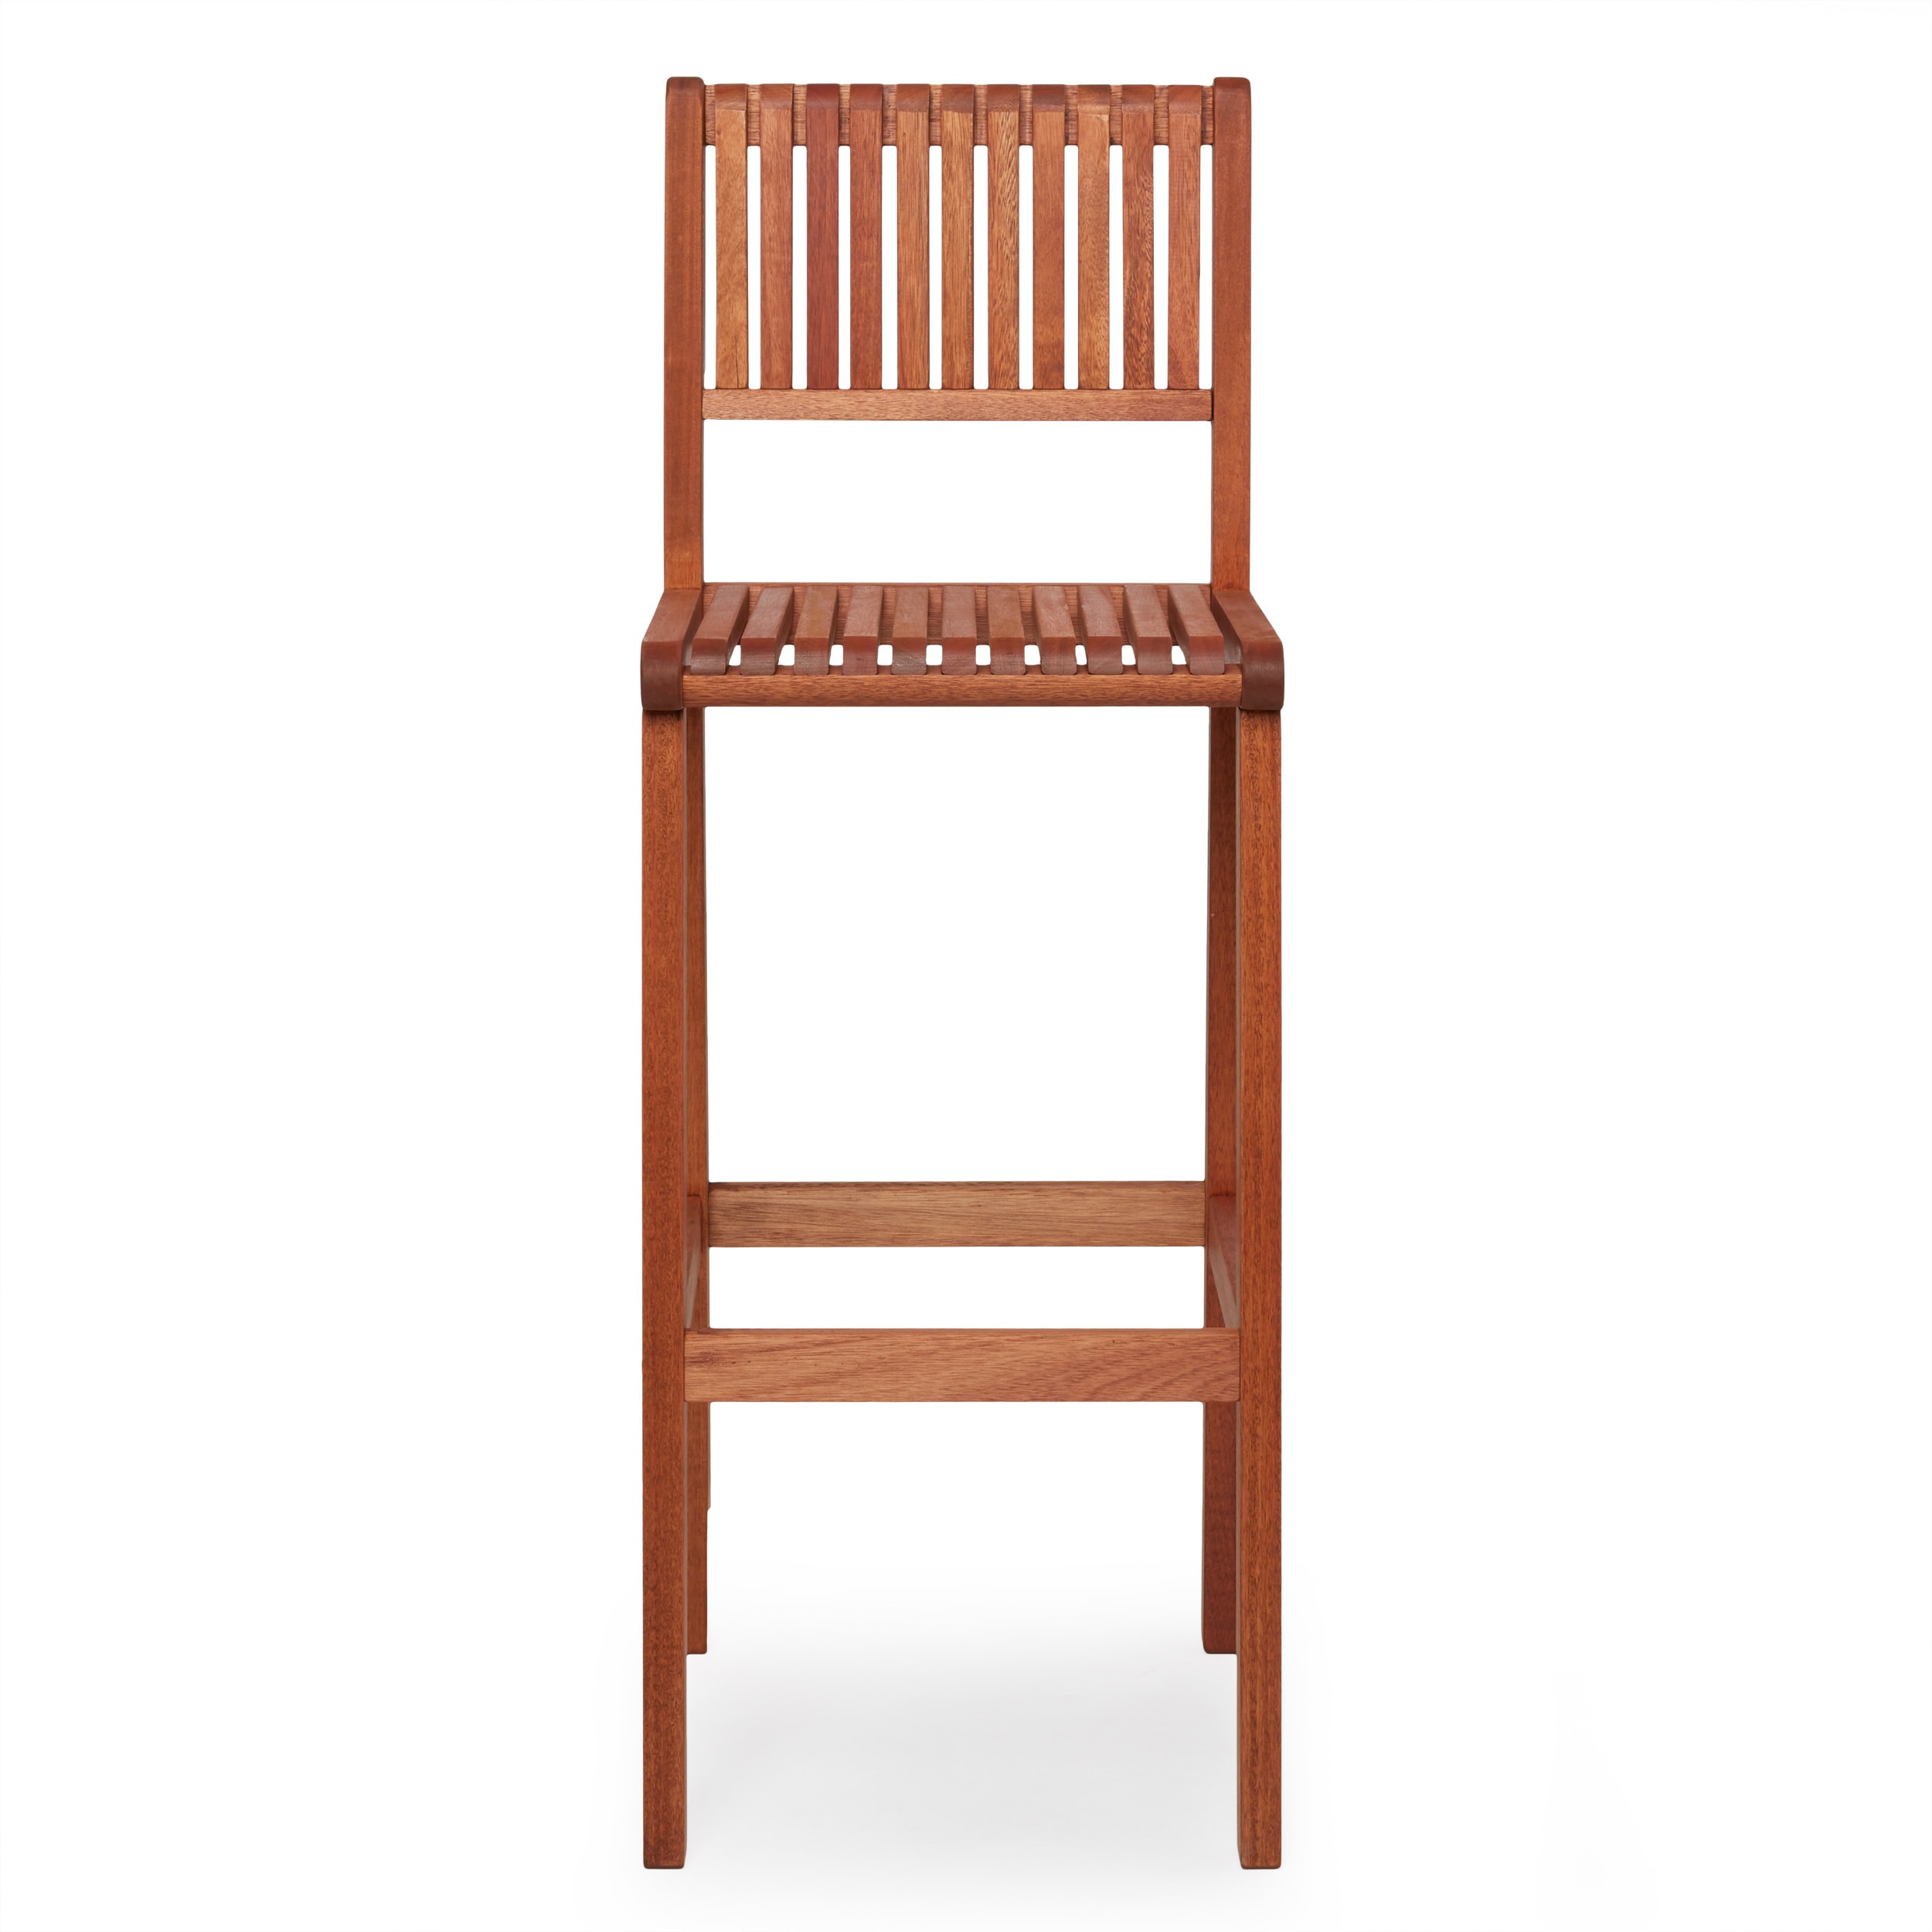 Amazonia Milano 1-Piece Patio Barstool | Eucalyptus Wood | Ideal for Outdoors and Indoors - image 3 of 8